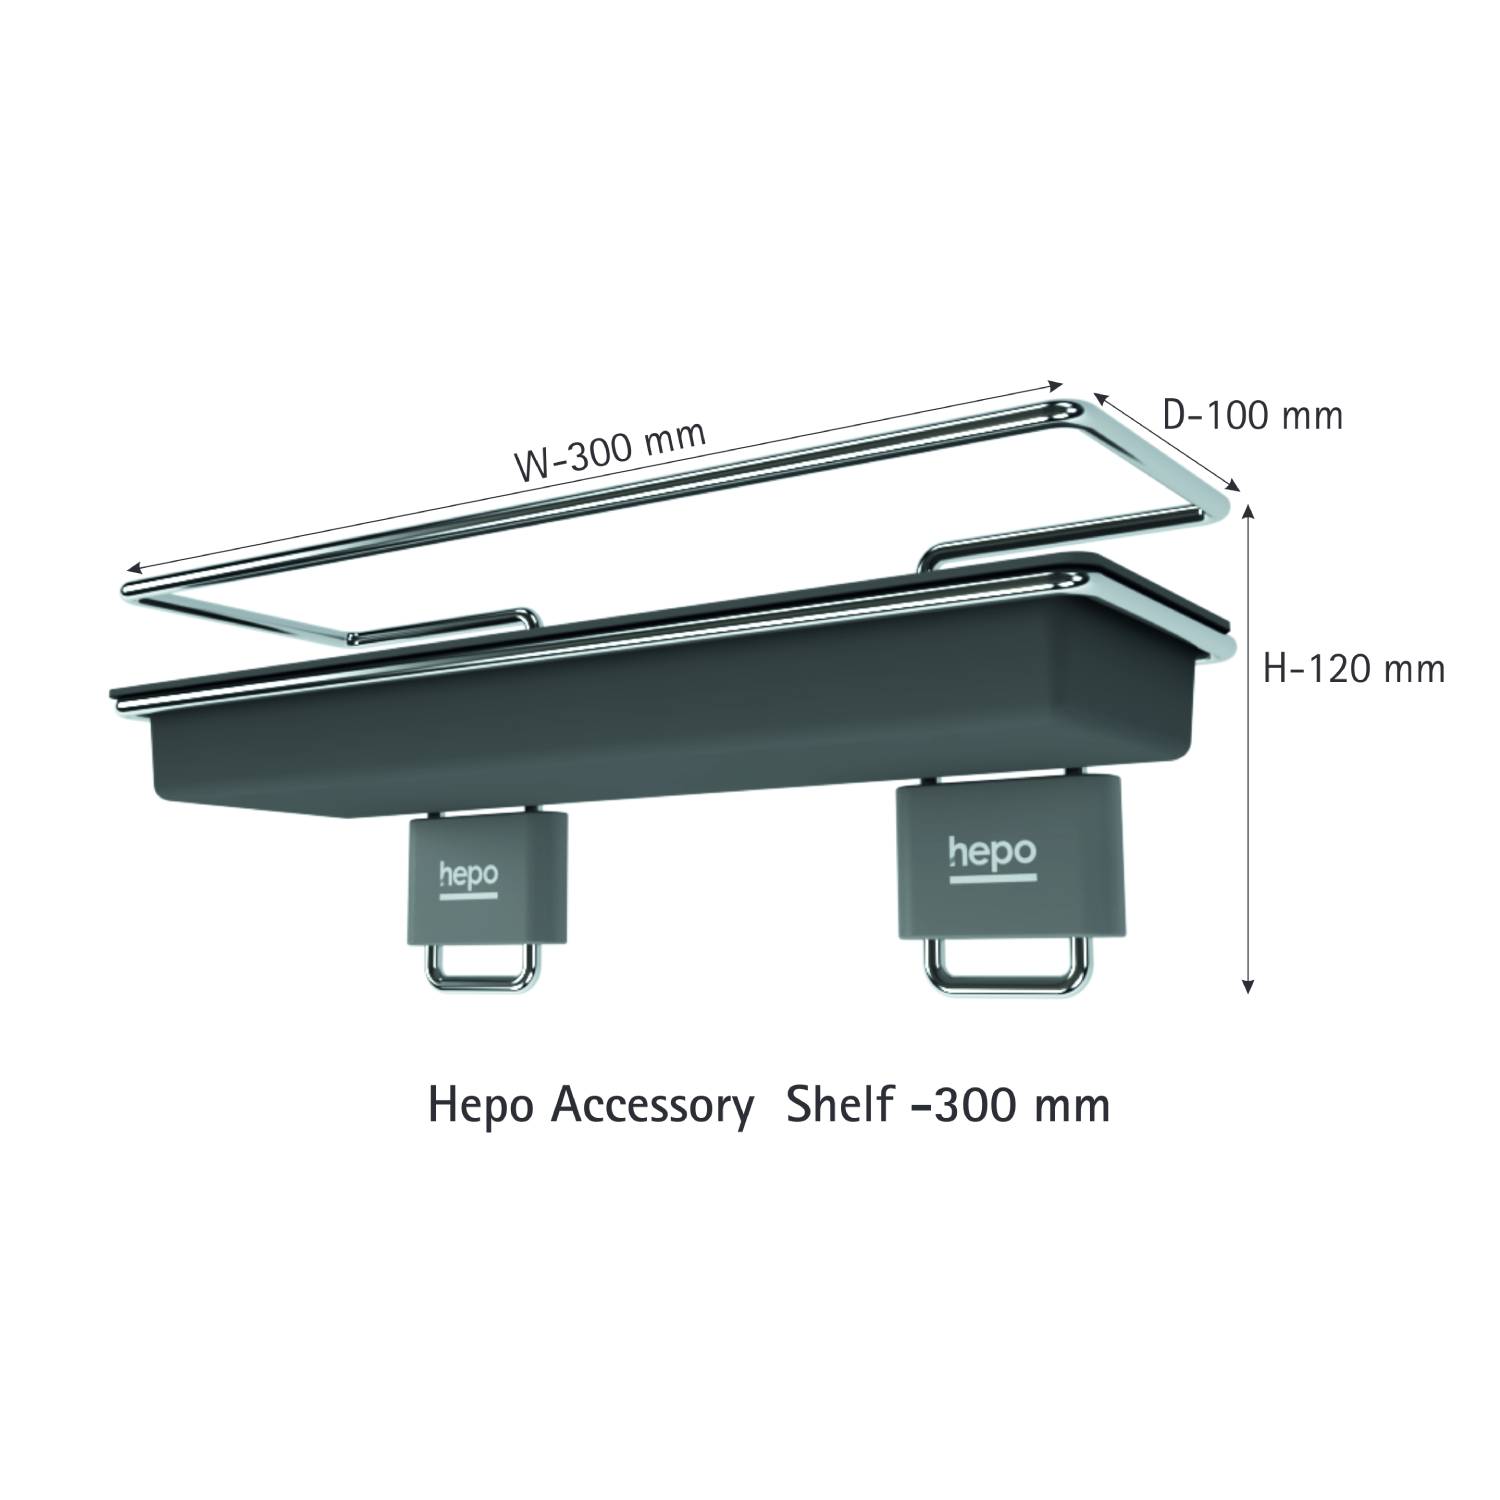 Hepo Stainless Steel 300 mm Accessory Shelf